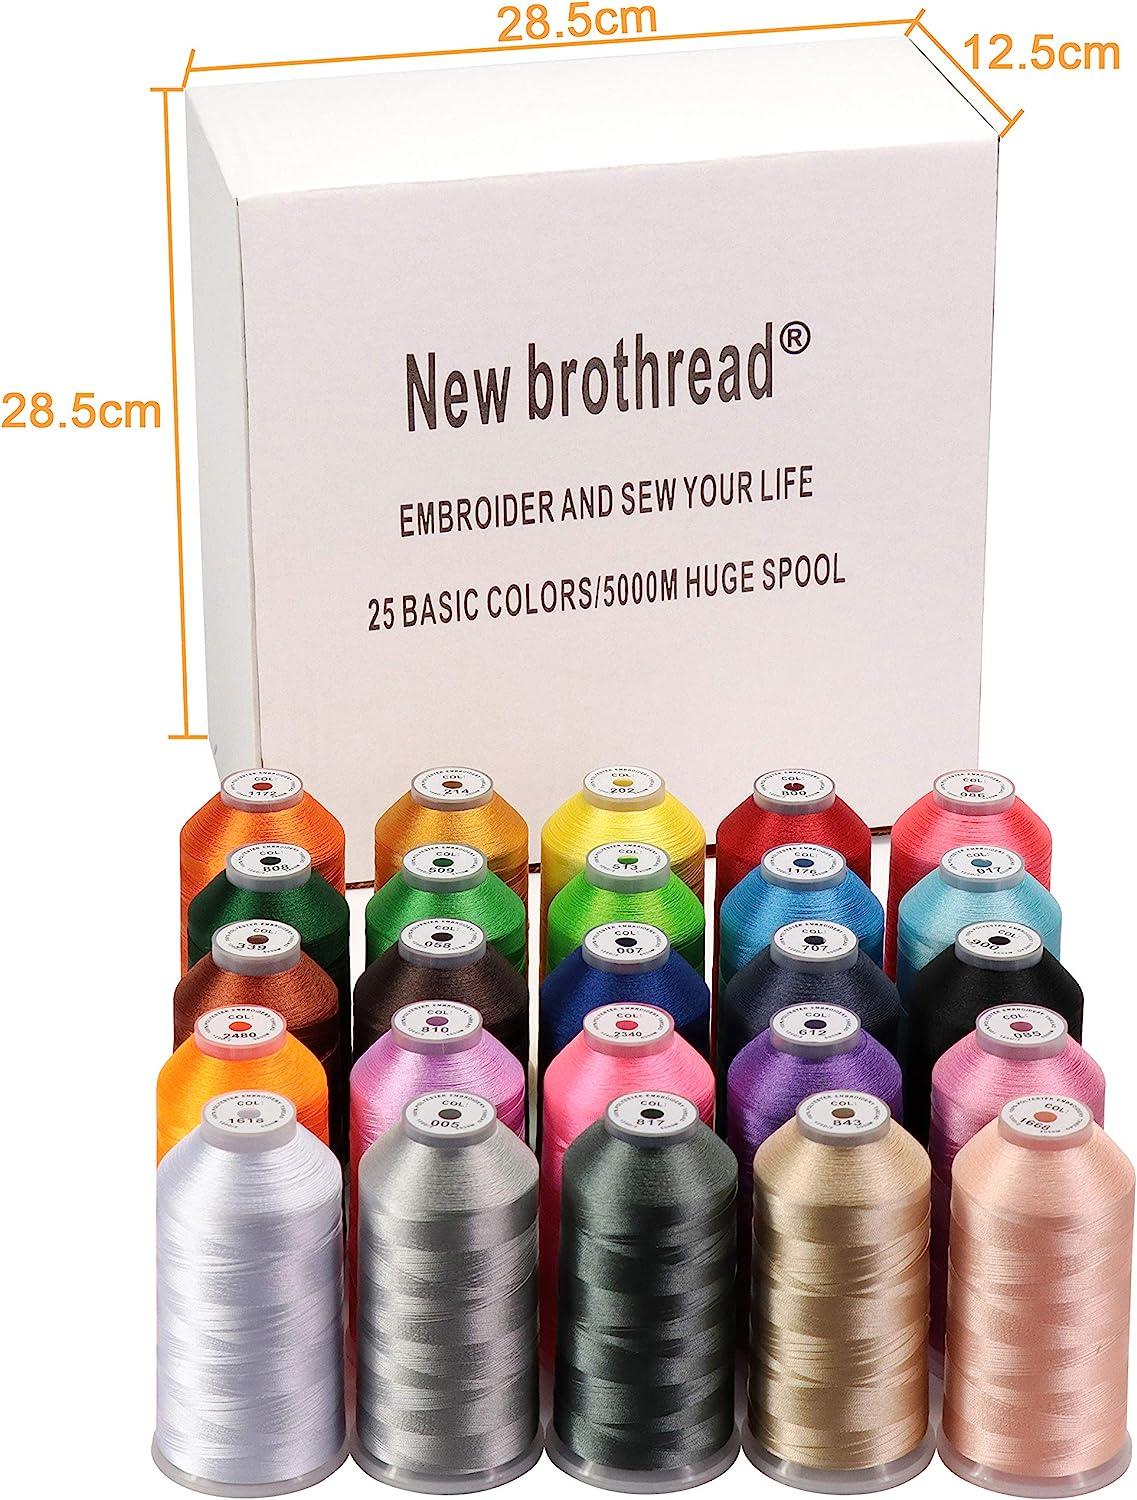 New brothreads - 25 Basic Colors of Huge Spool 5000M Polyester Embroidery  Machine Thread for Commercial and Domestic Embroidery Machines